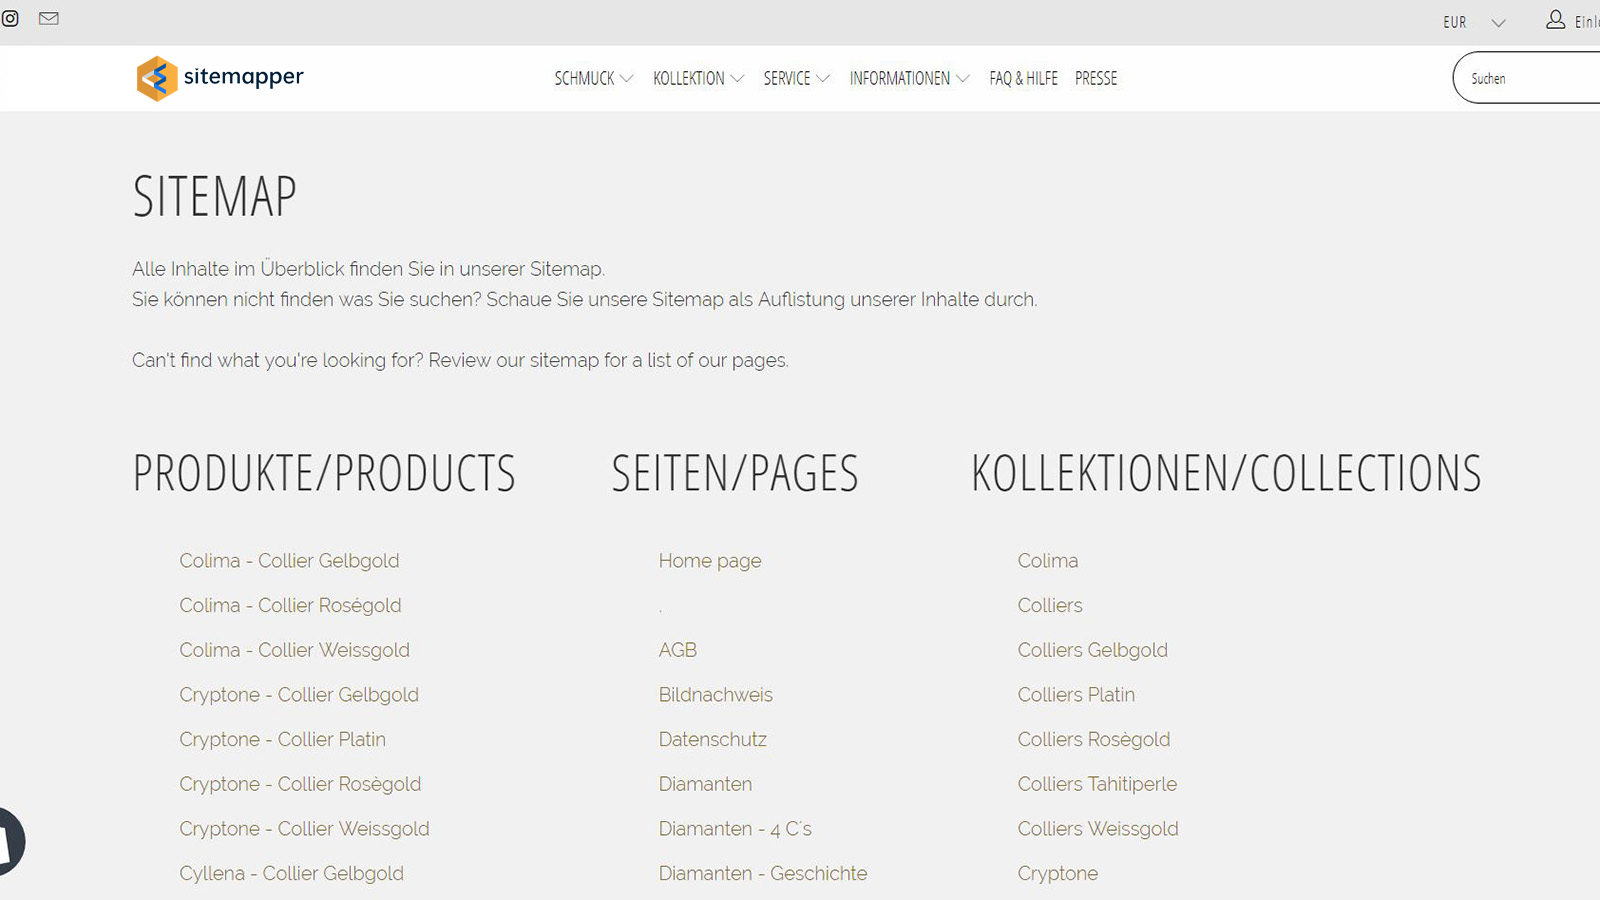 Multilingual sitemap page